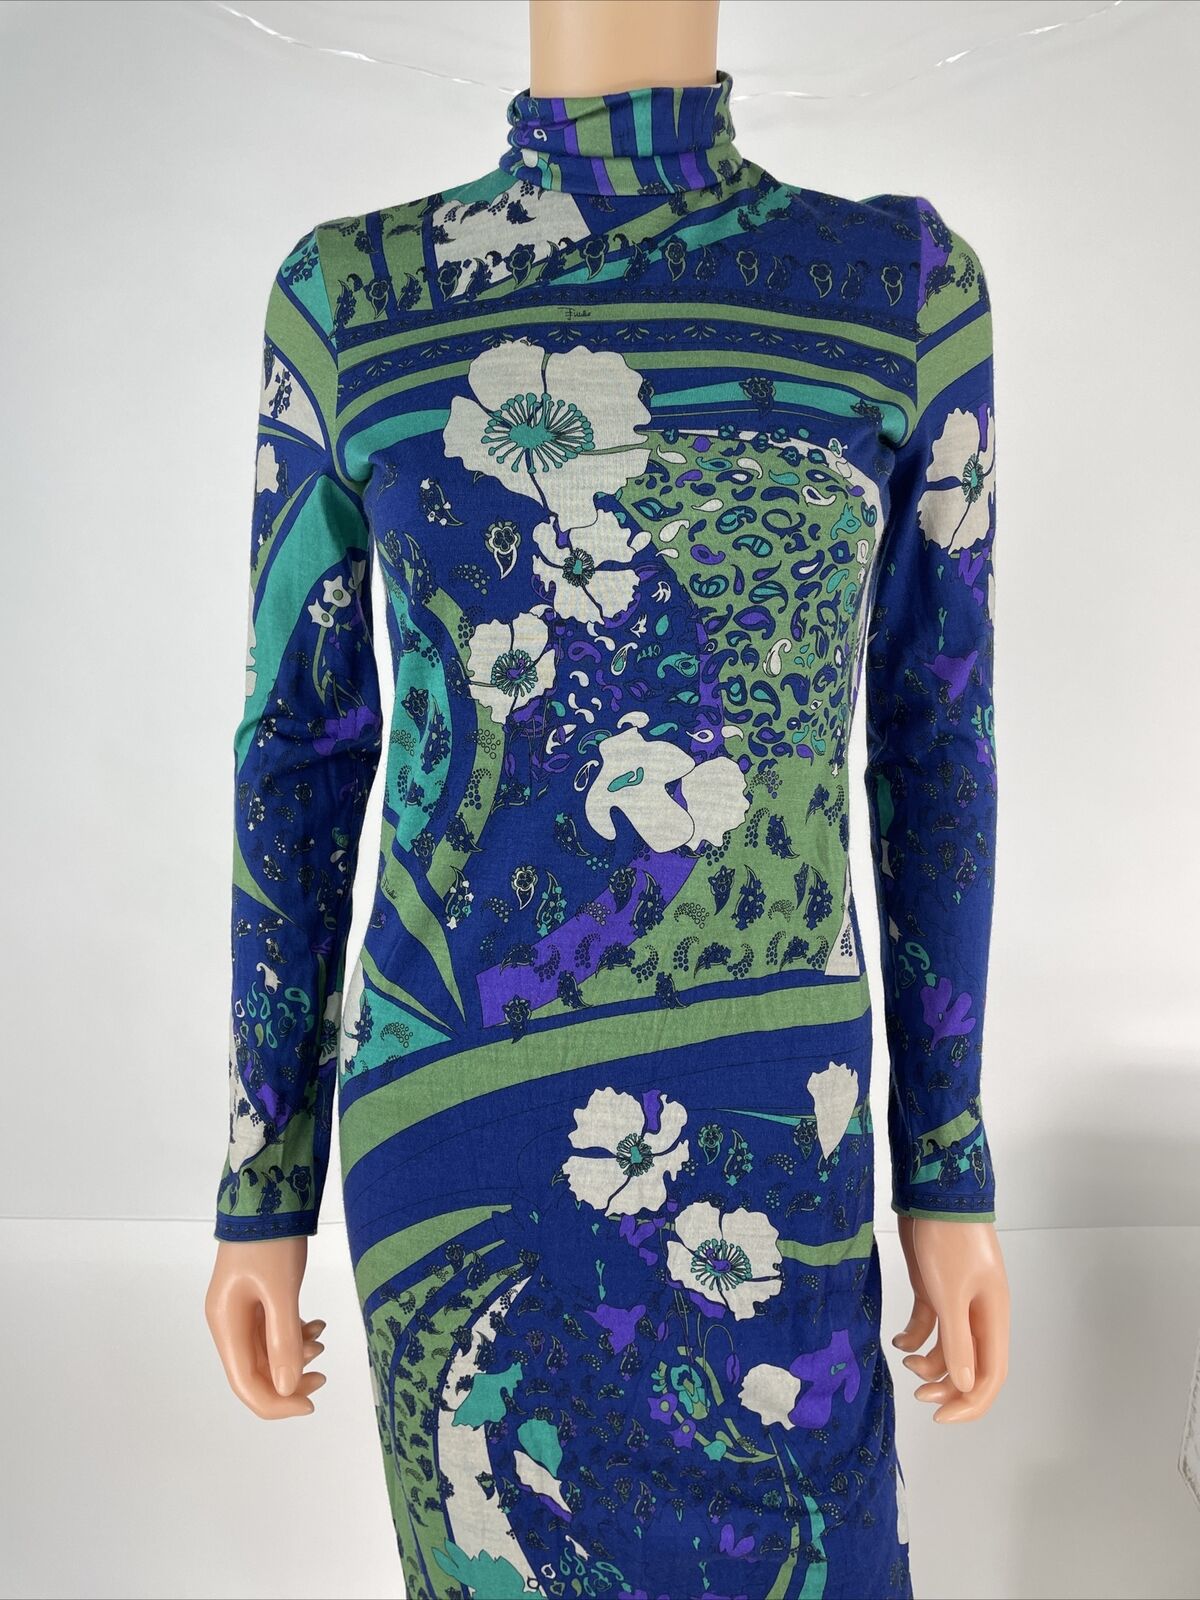 Emilio Pucci Blue Dress Swirl Abstract Long Sleev… - image 5